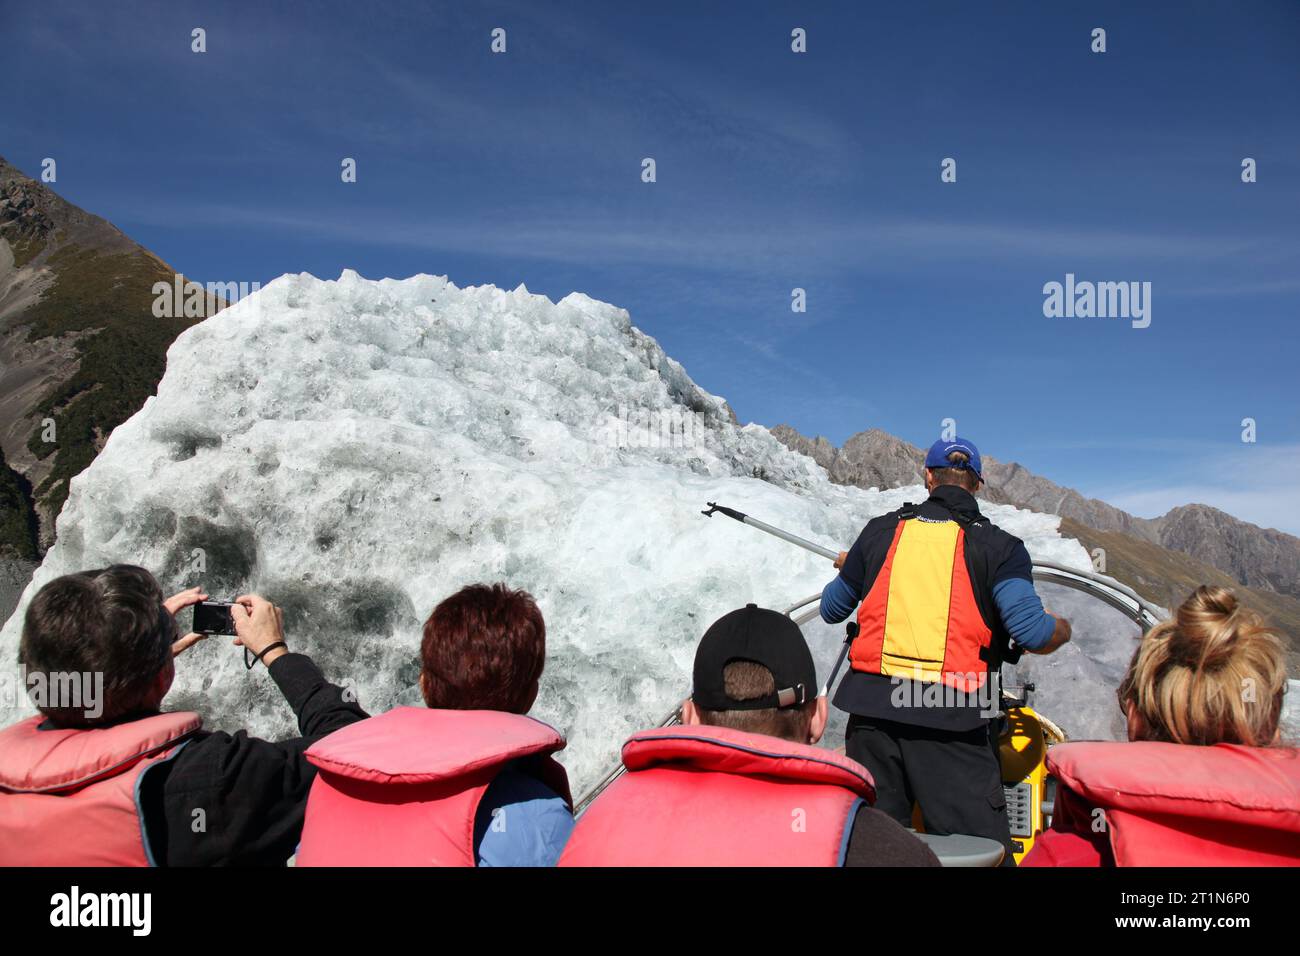 TASMAN LAKE - APRIL 12: A group of tourist watch as the tour guide brings the boat to an iceberg on Tasman Lake on April 12, 2011 in Tasman Lake, New Stock Photo